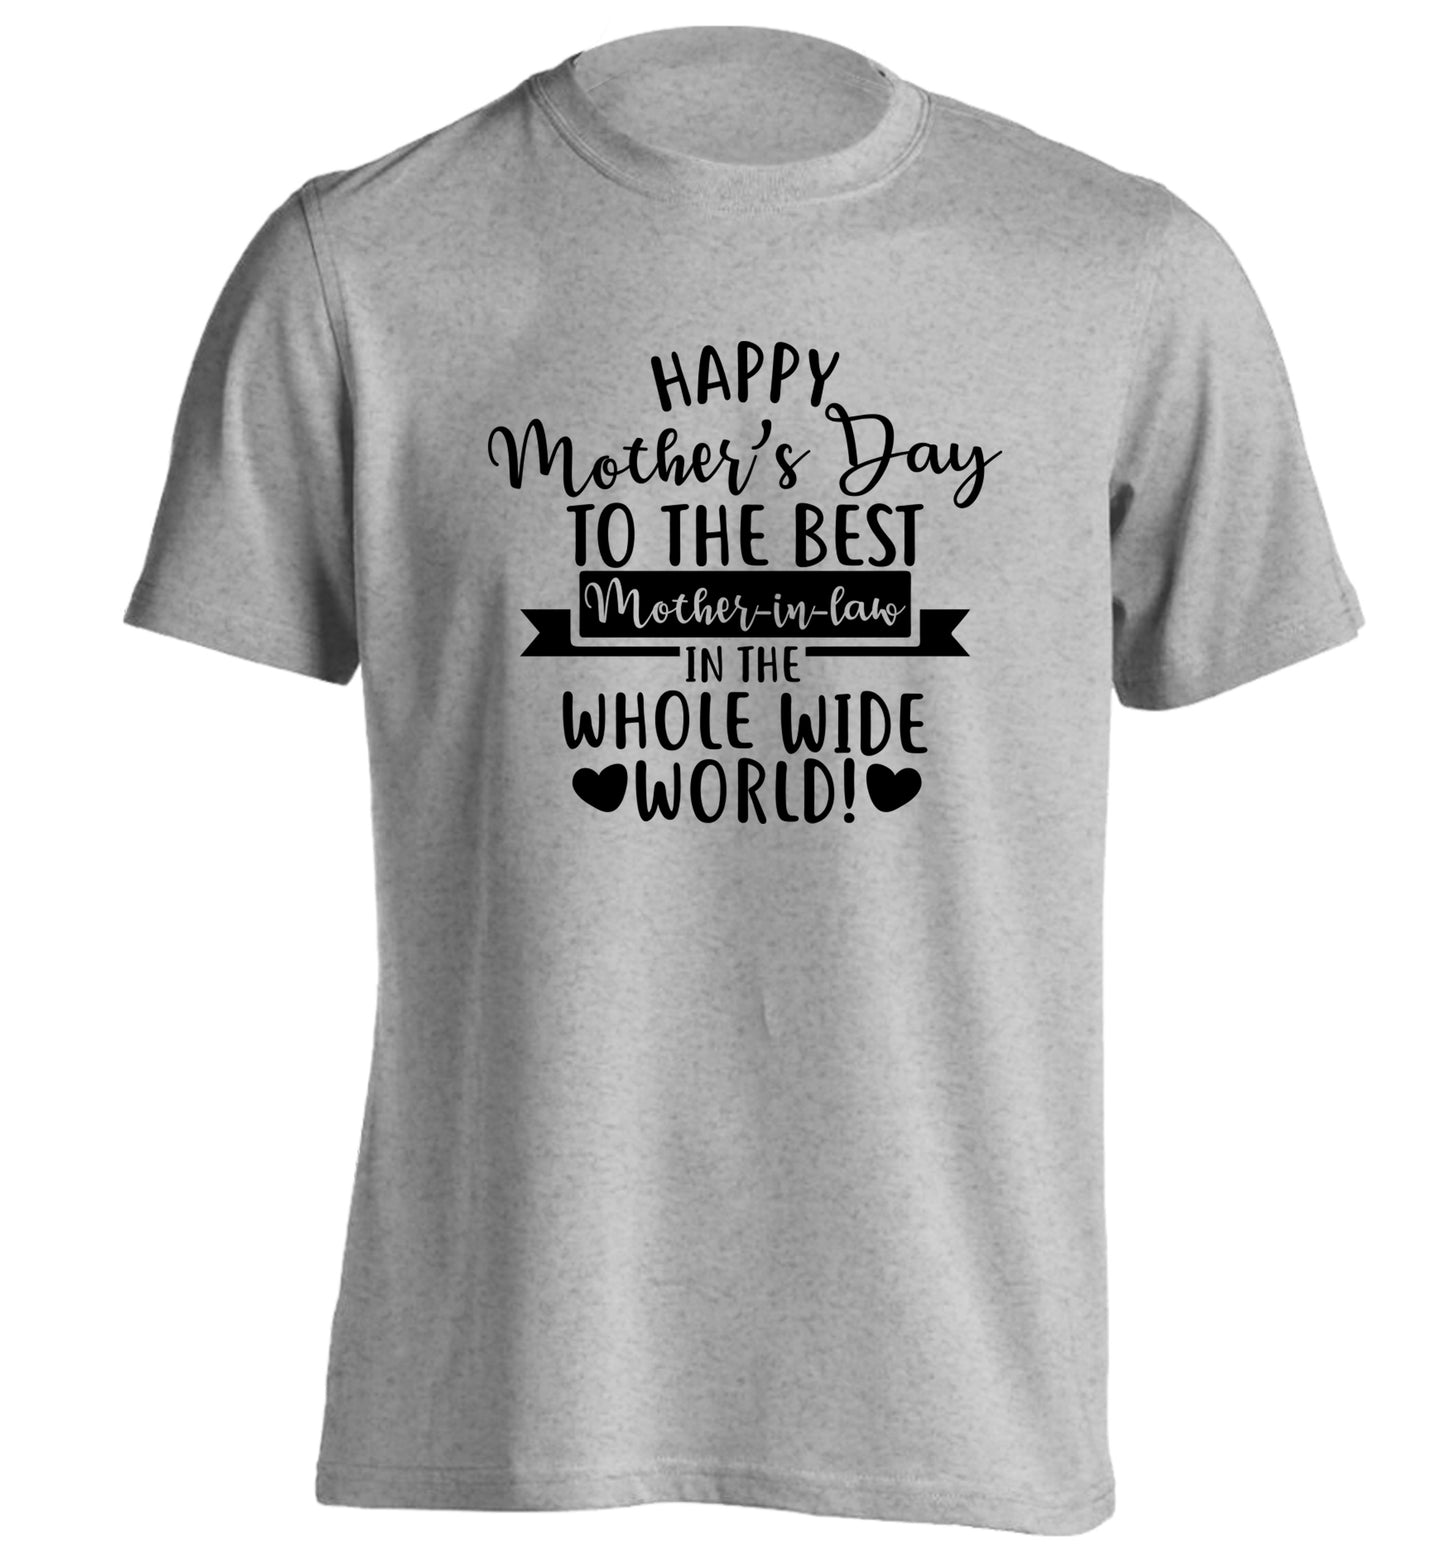 Happy mother's day to the best mother-in-law in the world adults unisex grey Tshirt 2XL